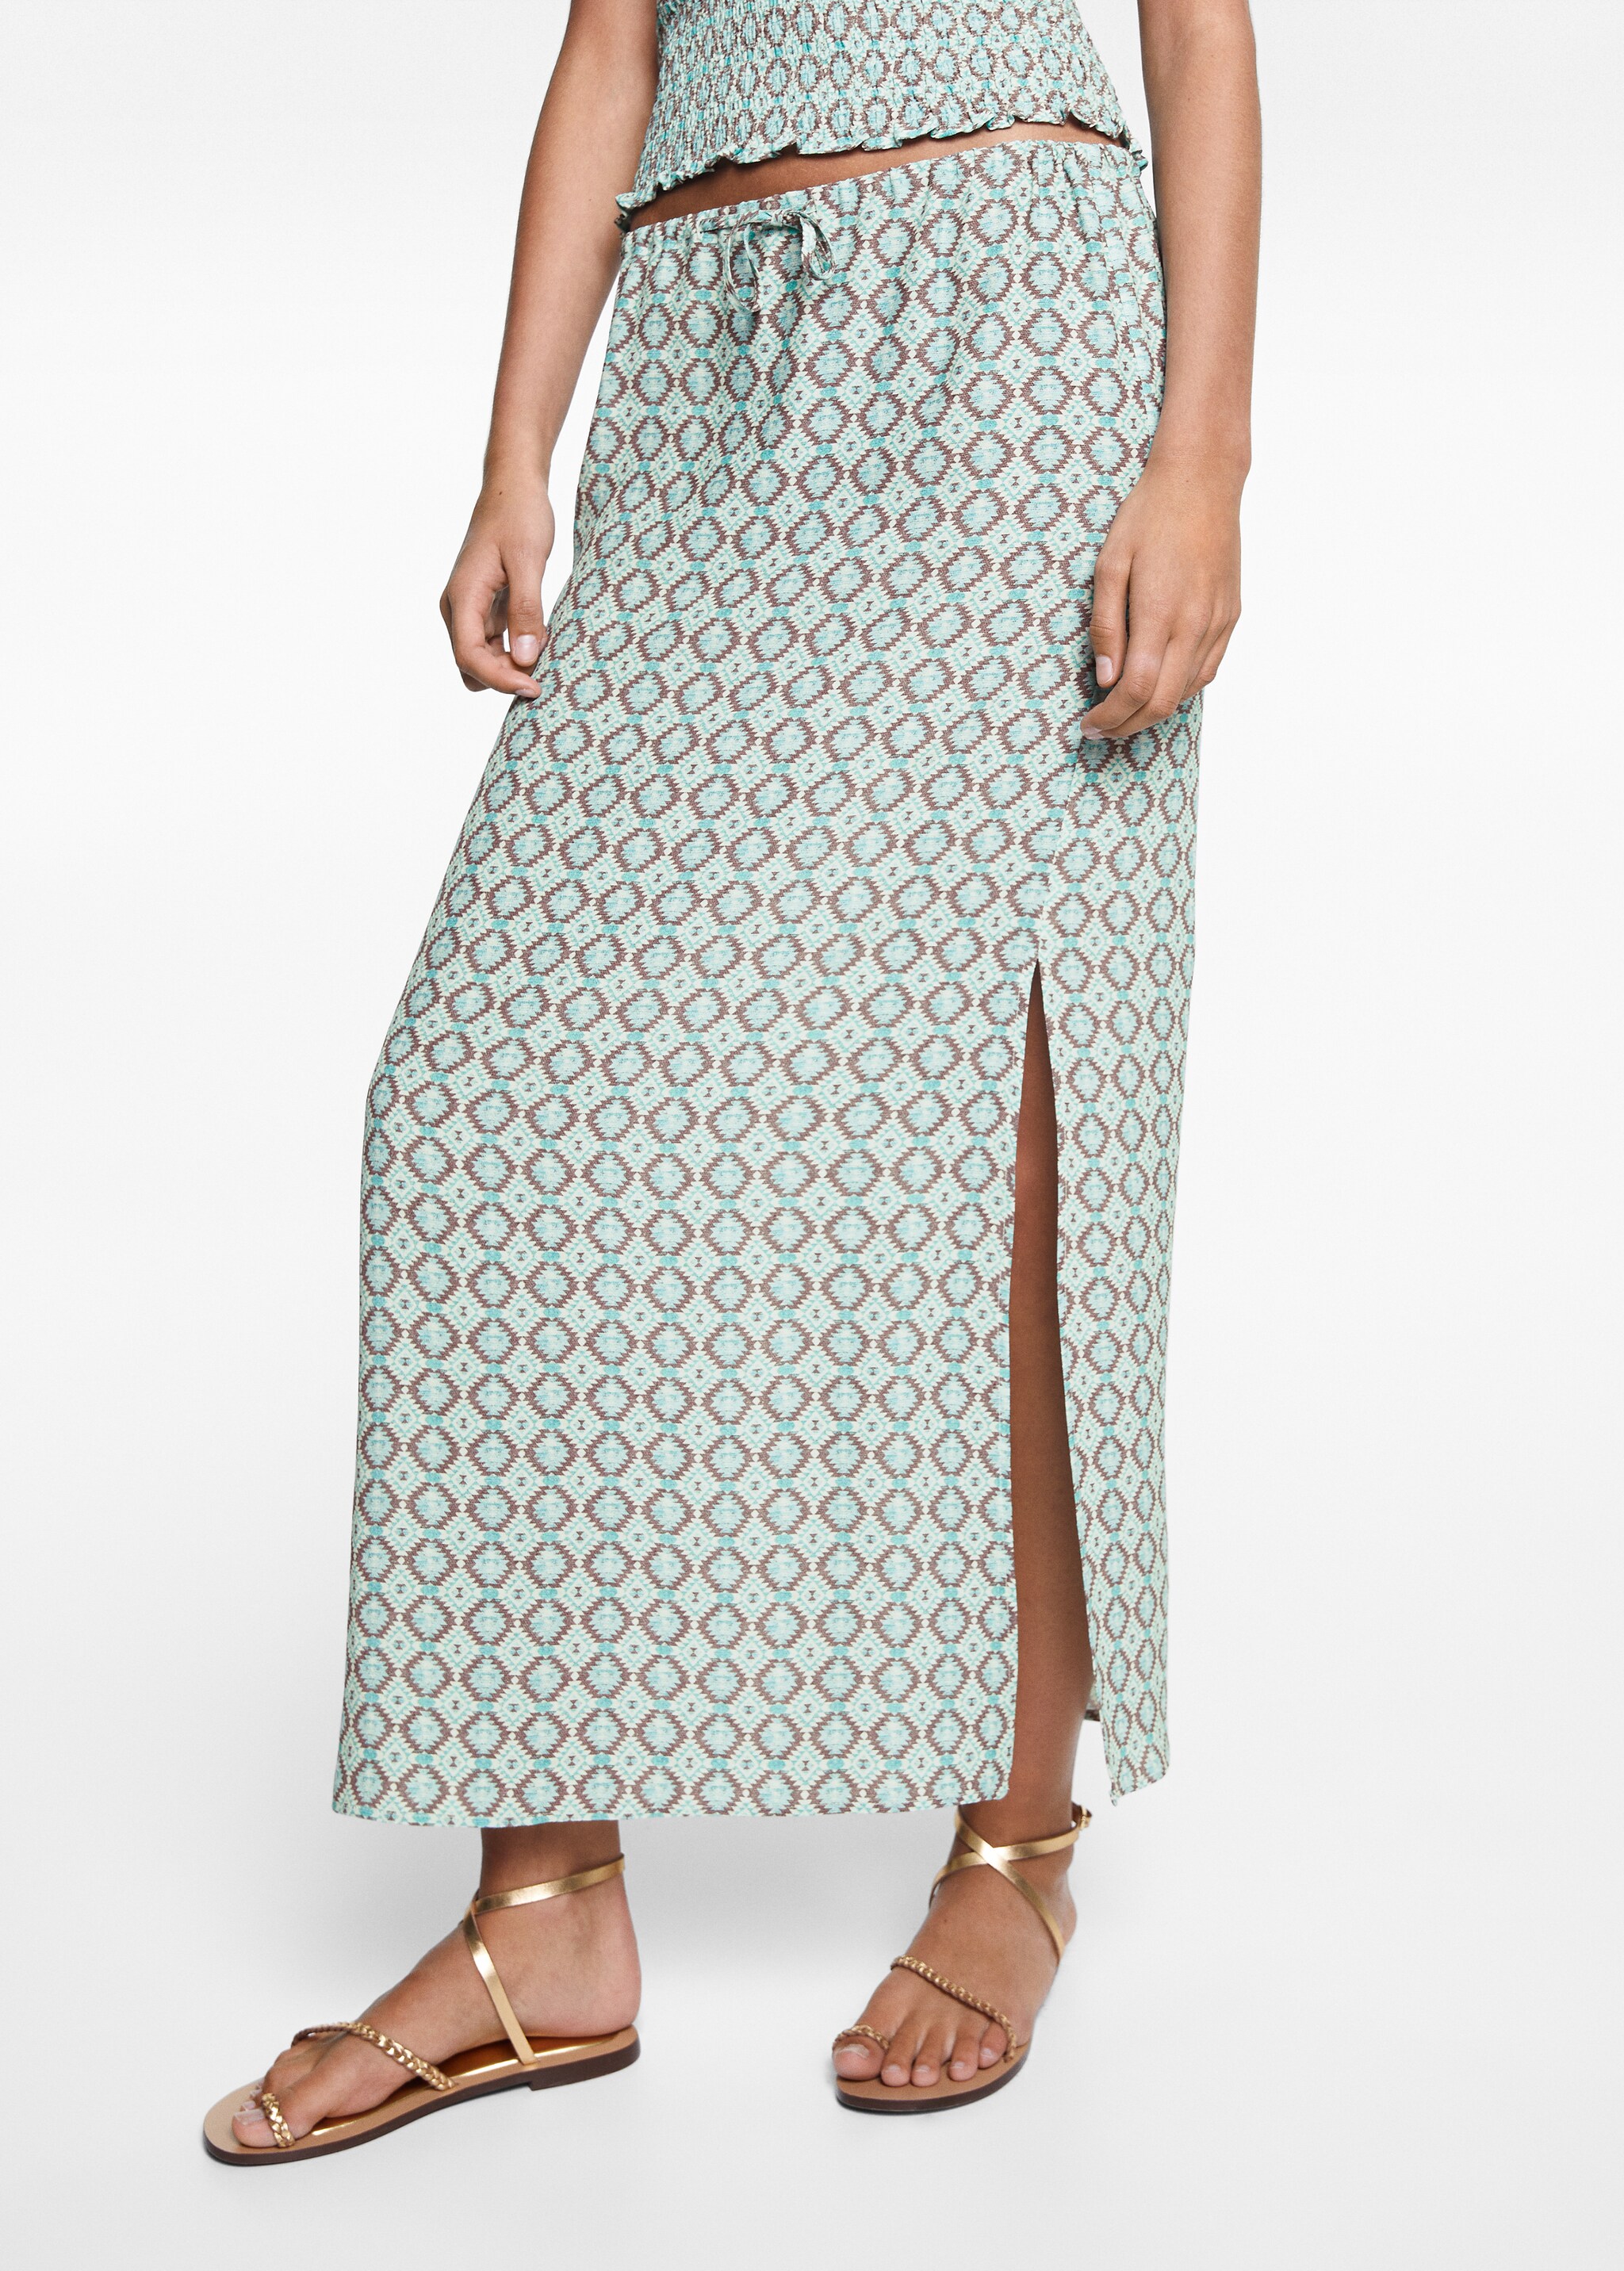 Printed midi skirt - Details of the article 6